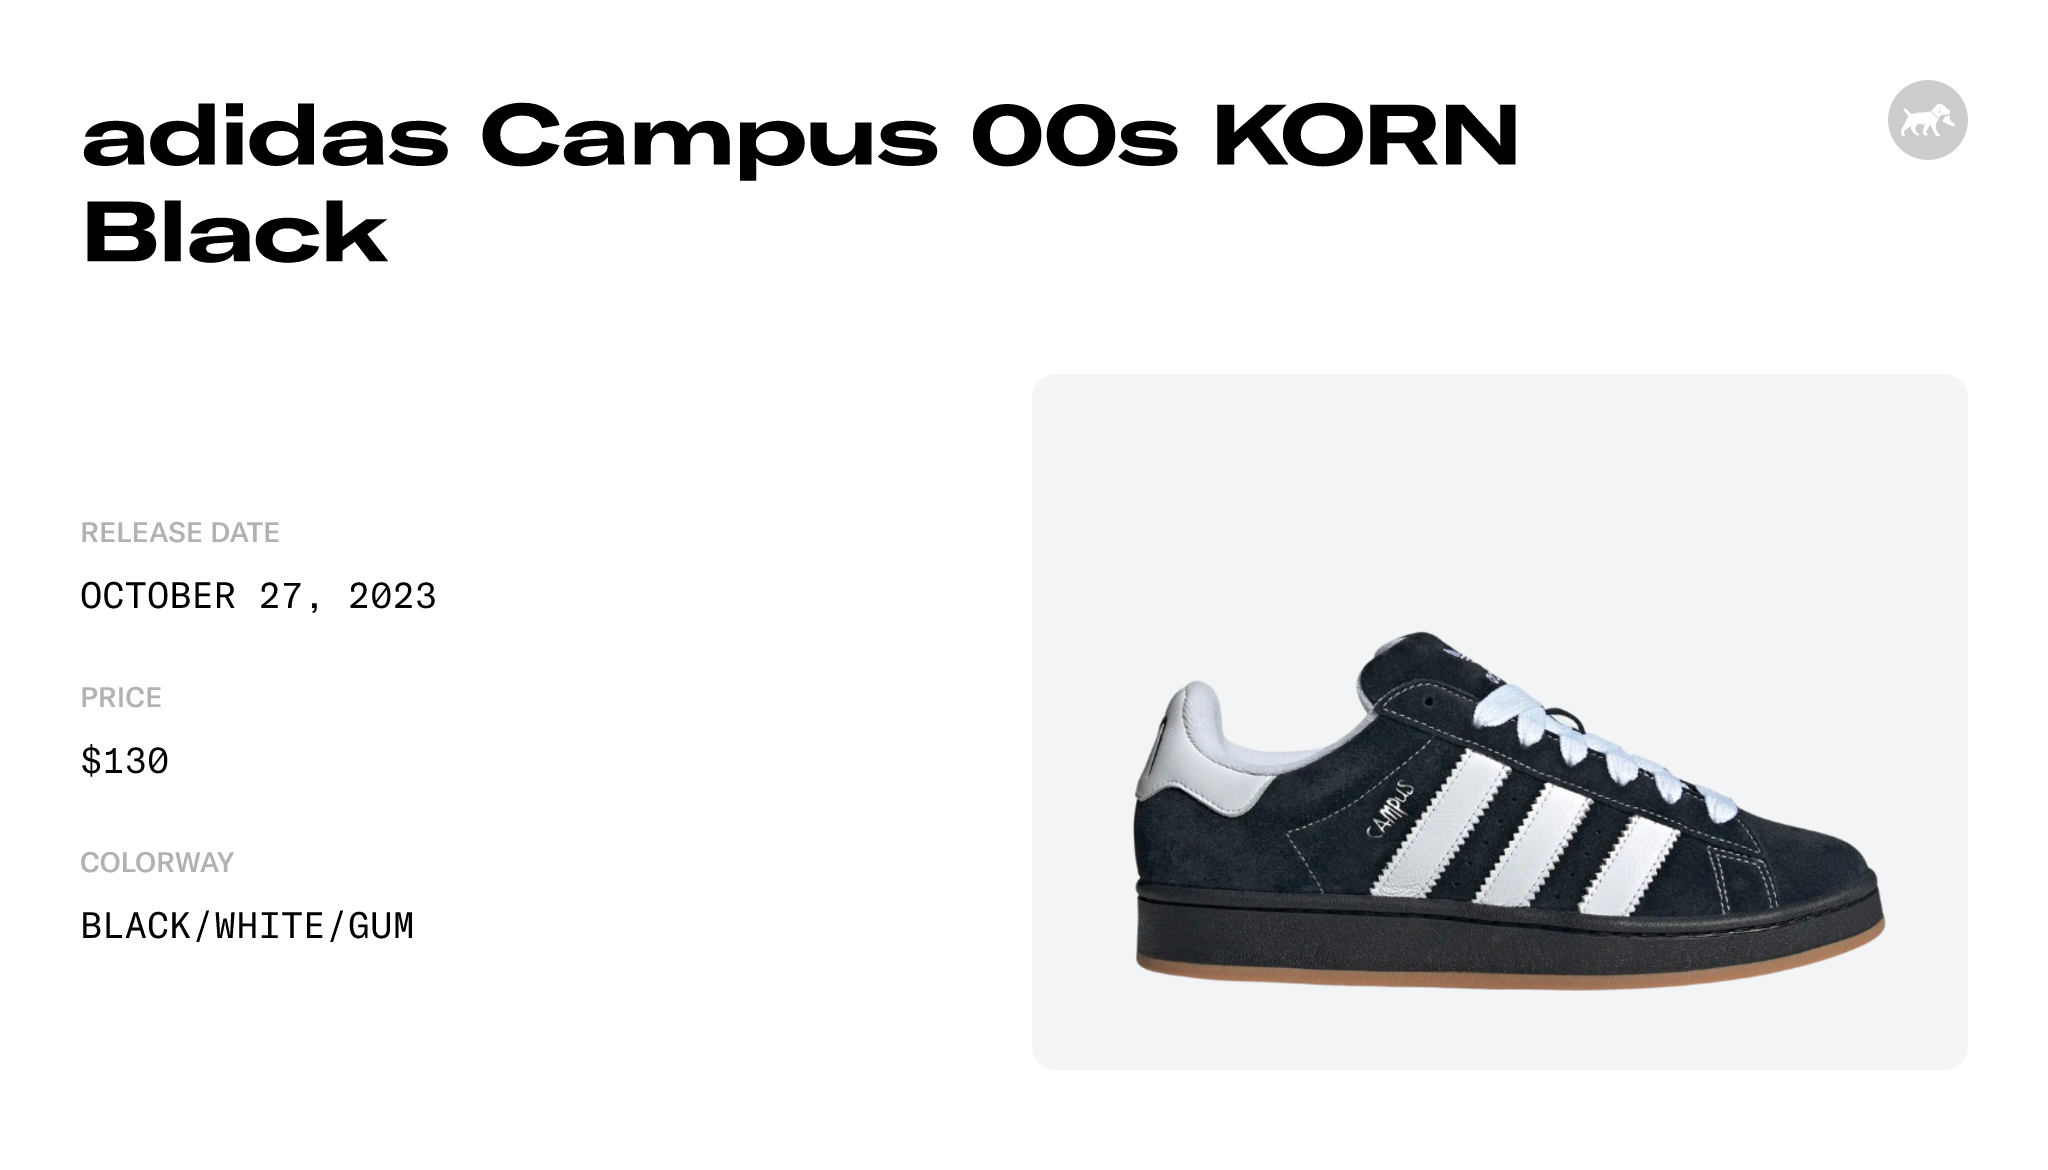 adidas Campus 00s Korn Black - IG0792 Raffles and Release Date